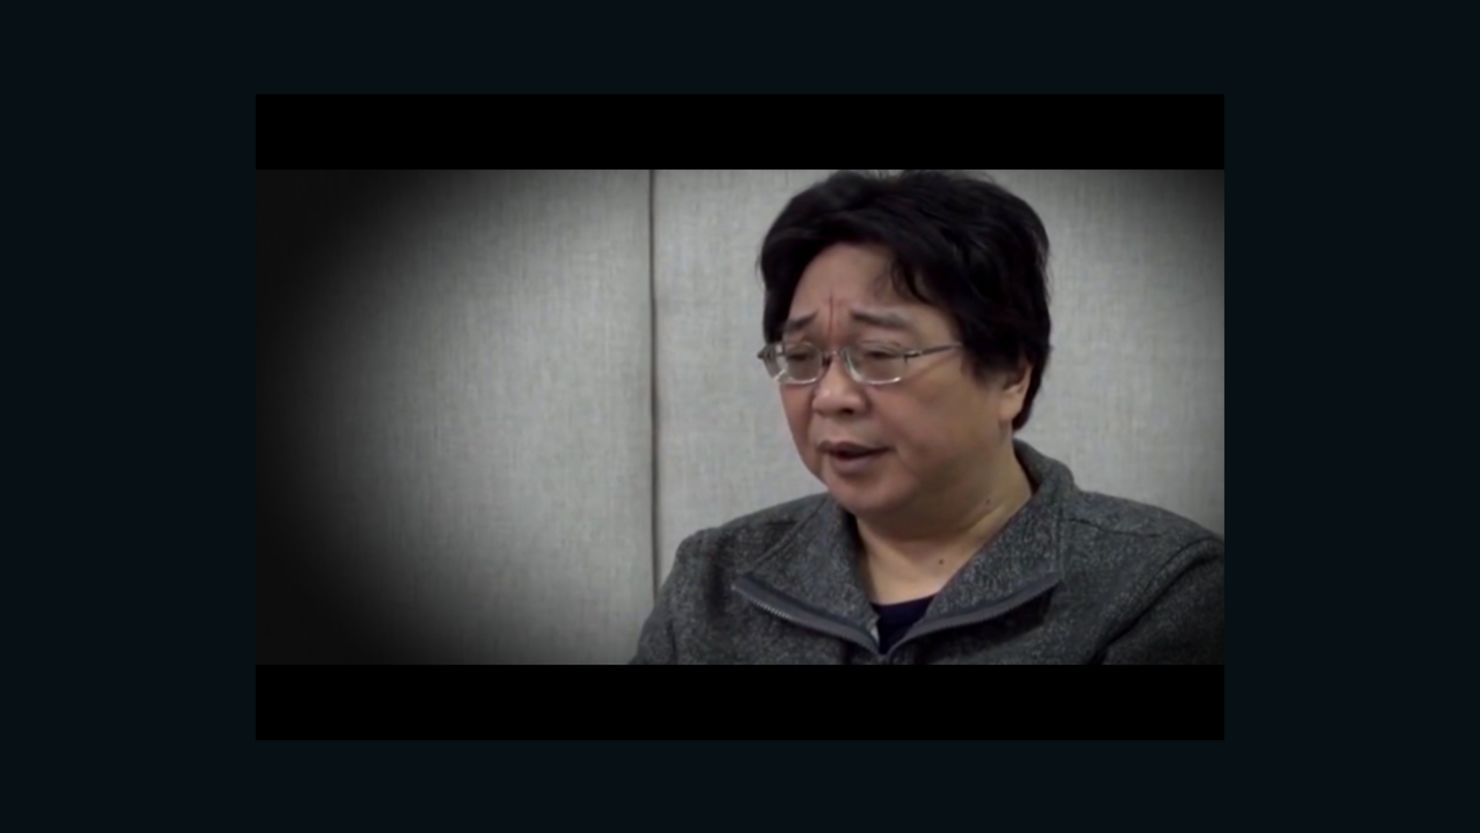 Hong Kong-based bookseller Gui Minhai appears on Chinese state television in 2016.